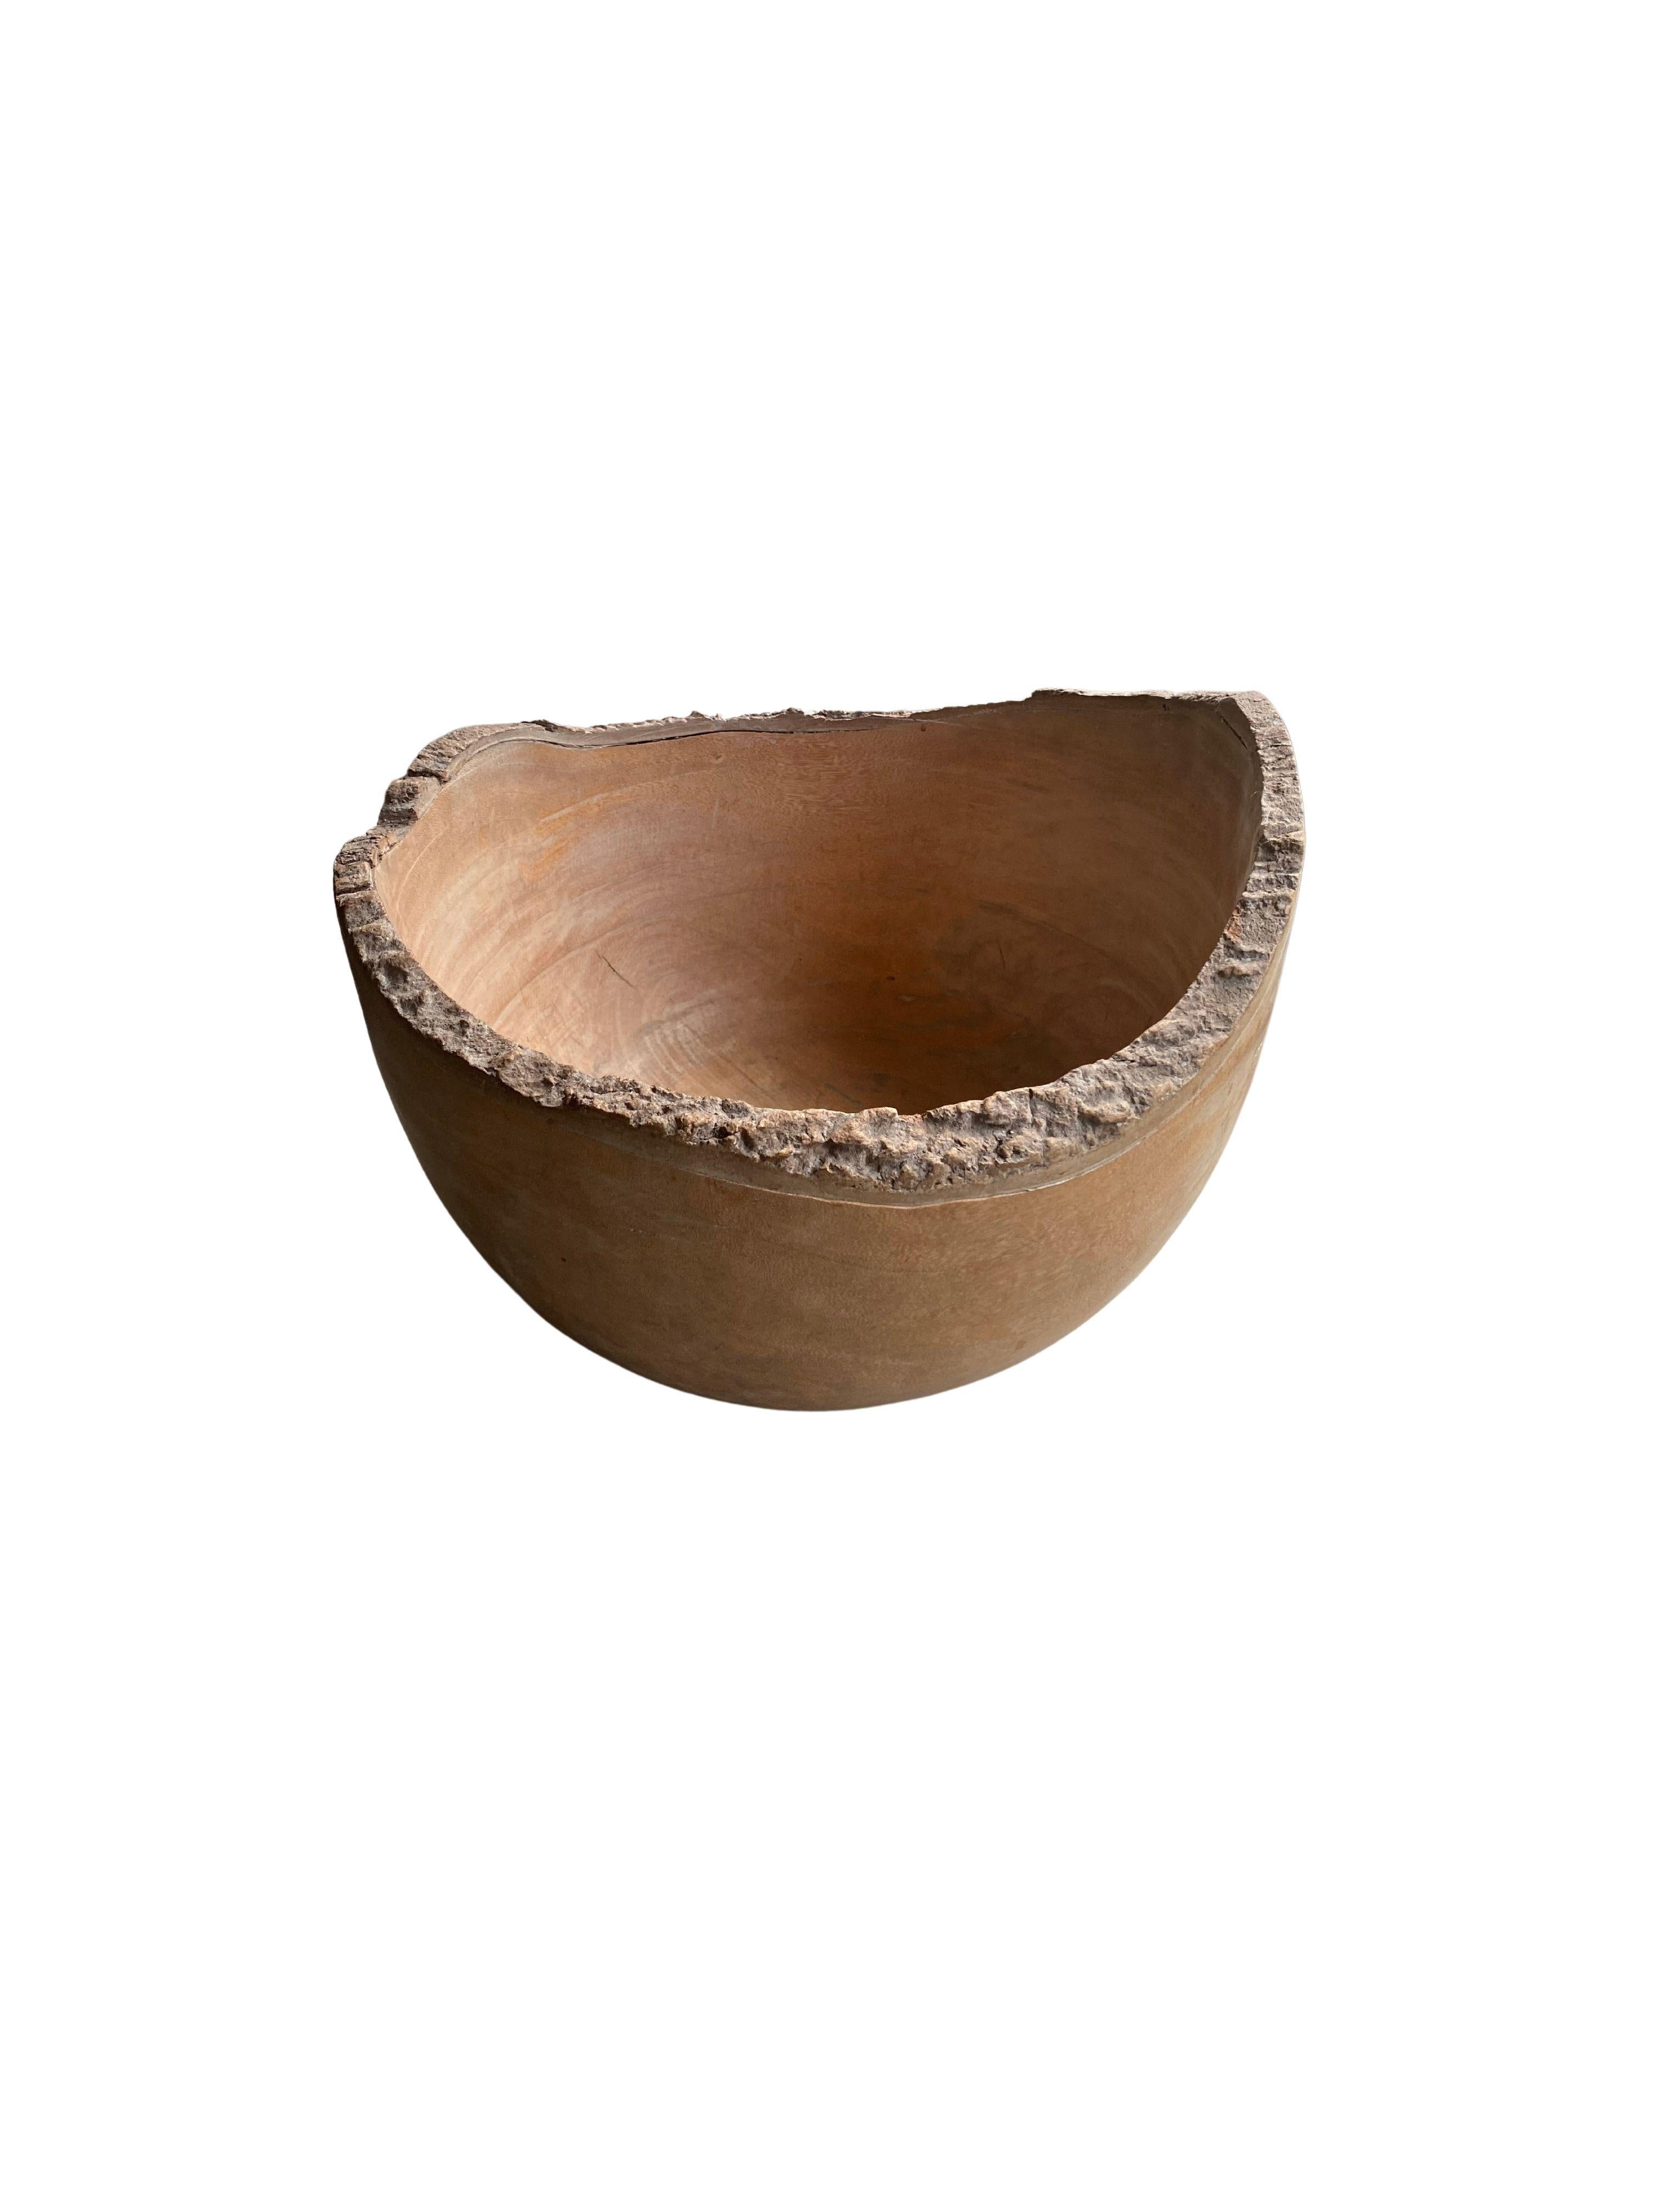 Carved Solid Teak Burl Wood Bowl from Java, Indonesia For Sale